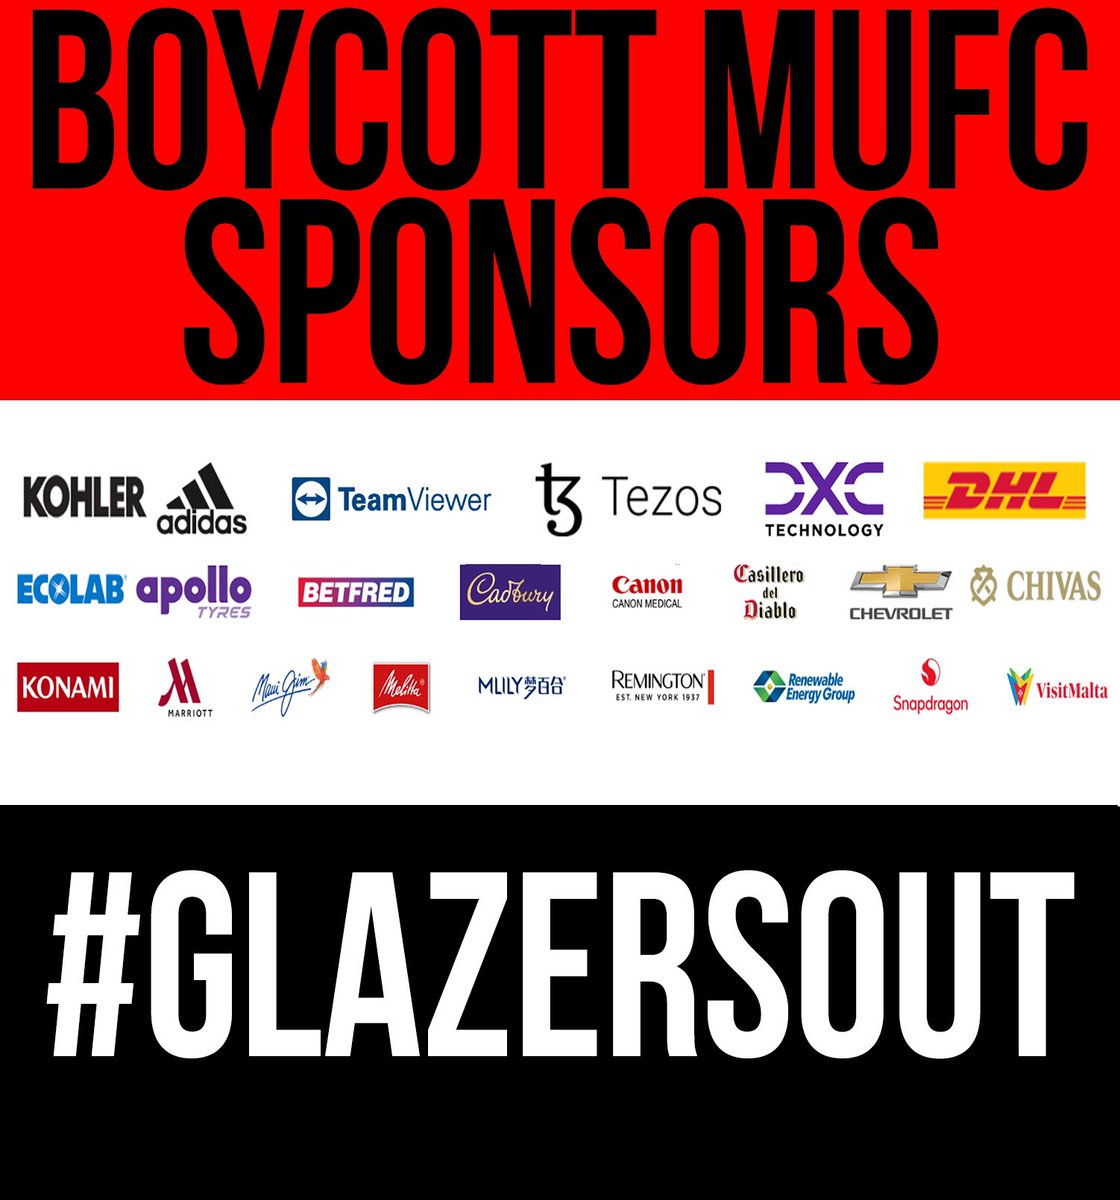 Boycott all MUFC sponsors  
We dont want the Glazers to stay at any cost or under any scenario.
#BOYCOTTMUFCSPONSORS #MUFC #MANUTD #FULLSALEONLY #GlazersOut #RATCLIFFEOUT #INEOSOUT #MUFCTakeover #MUFC